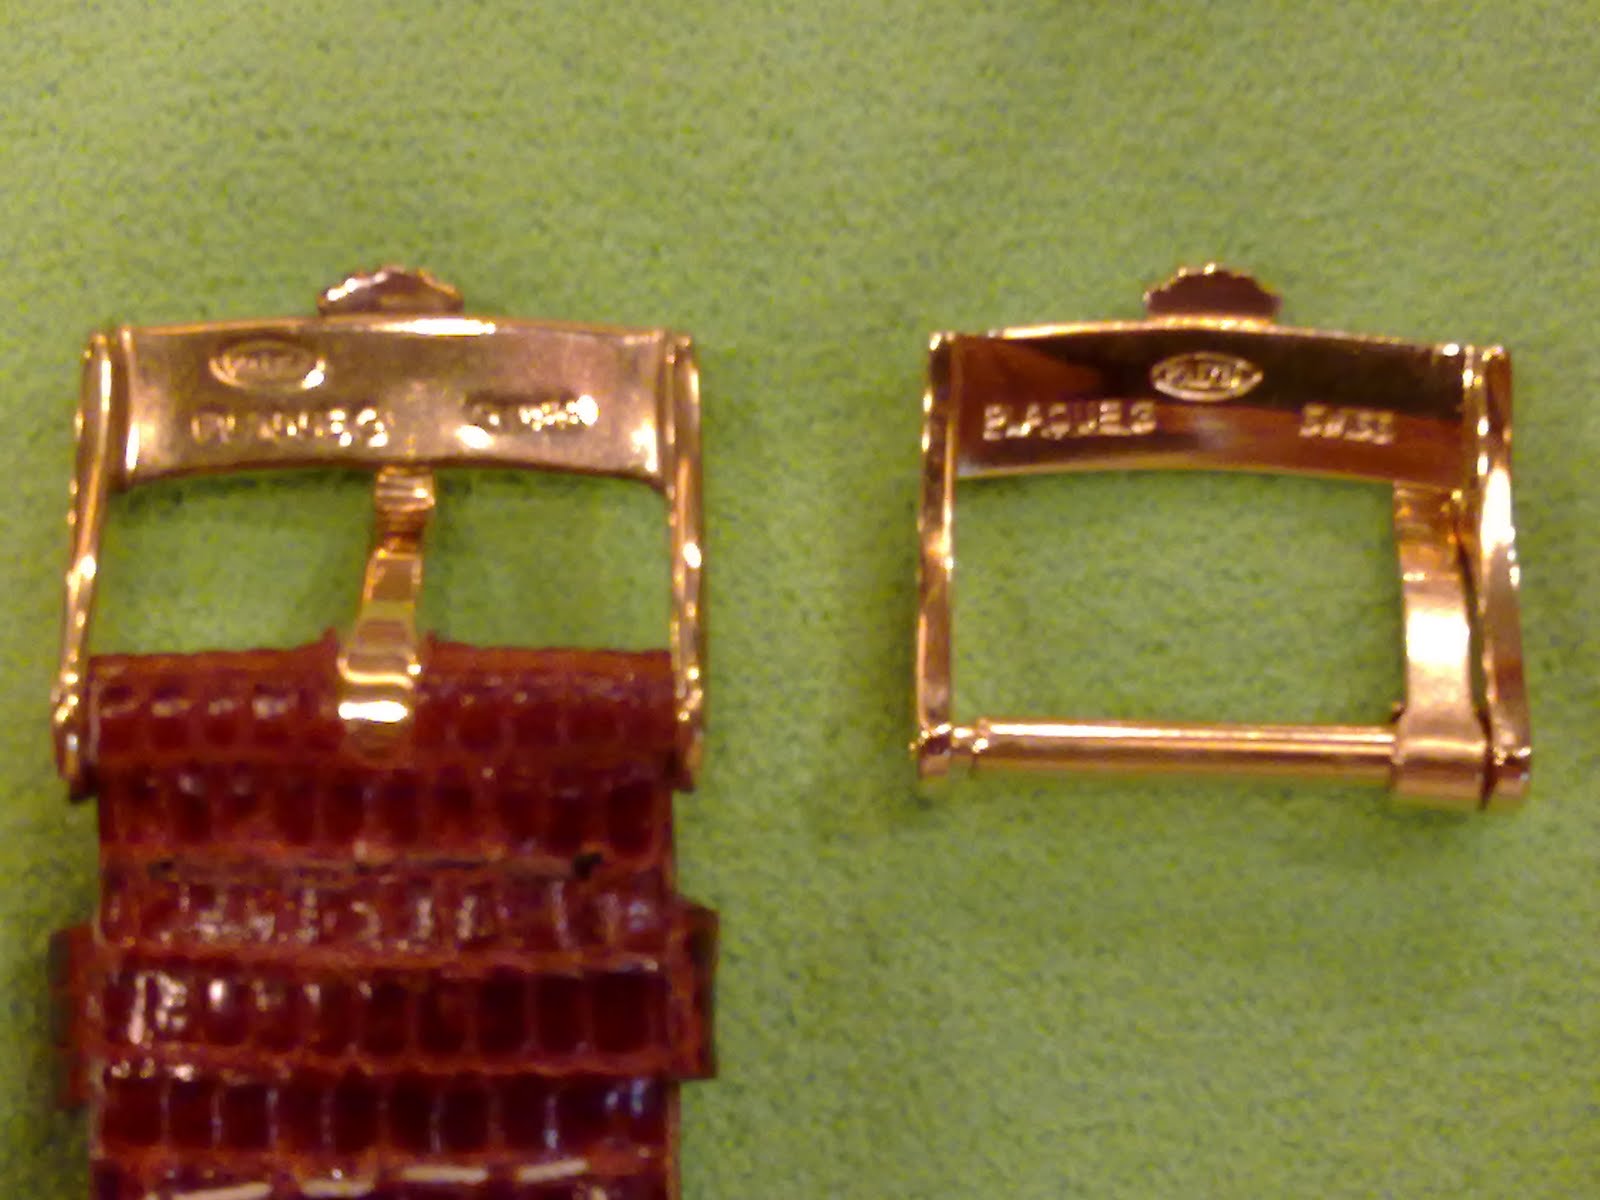 Attached two pictures of the Real and Fake Rolex Buckles